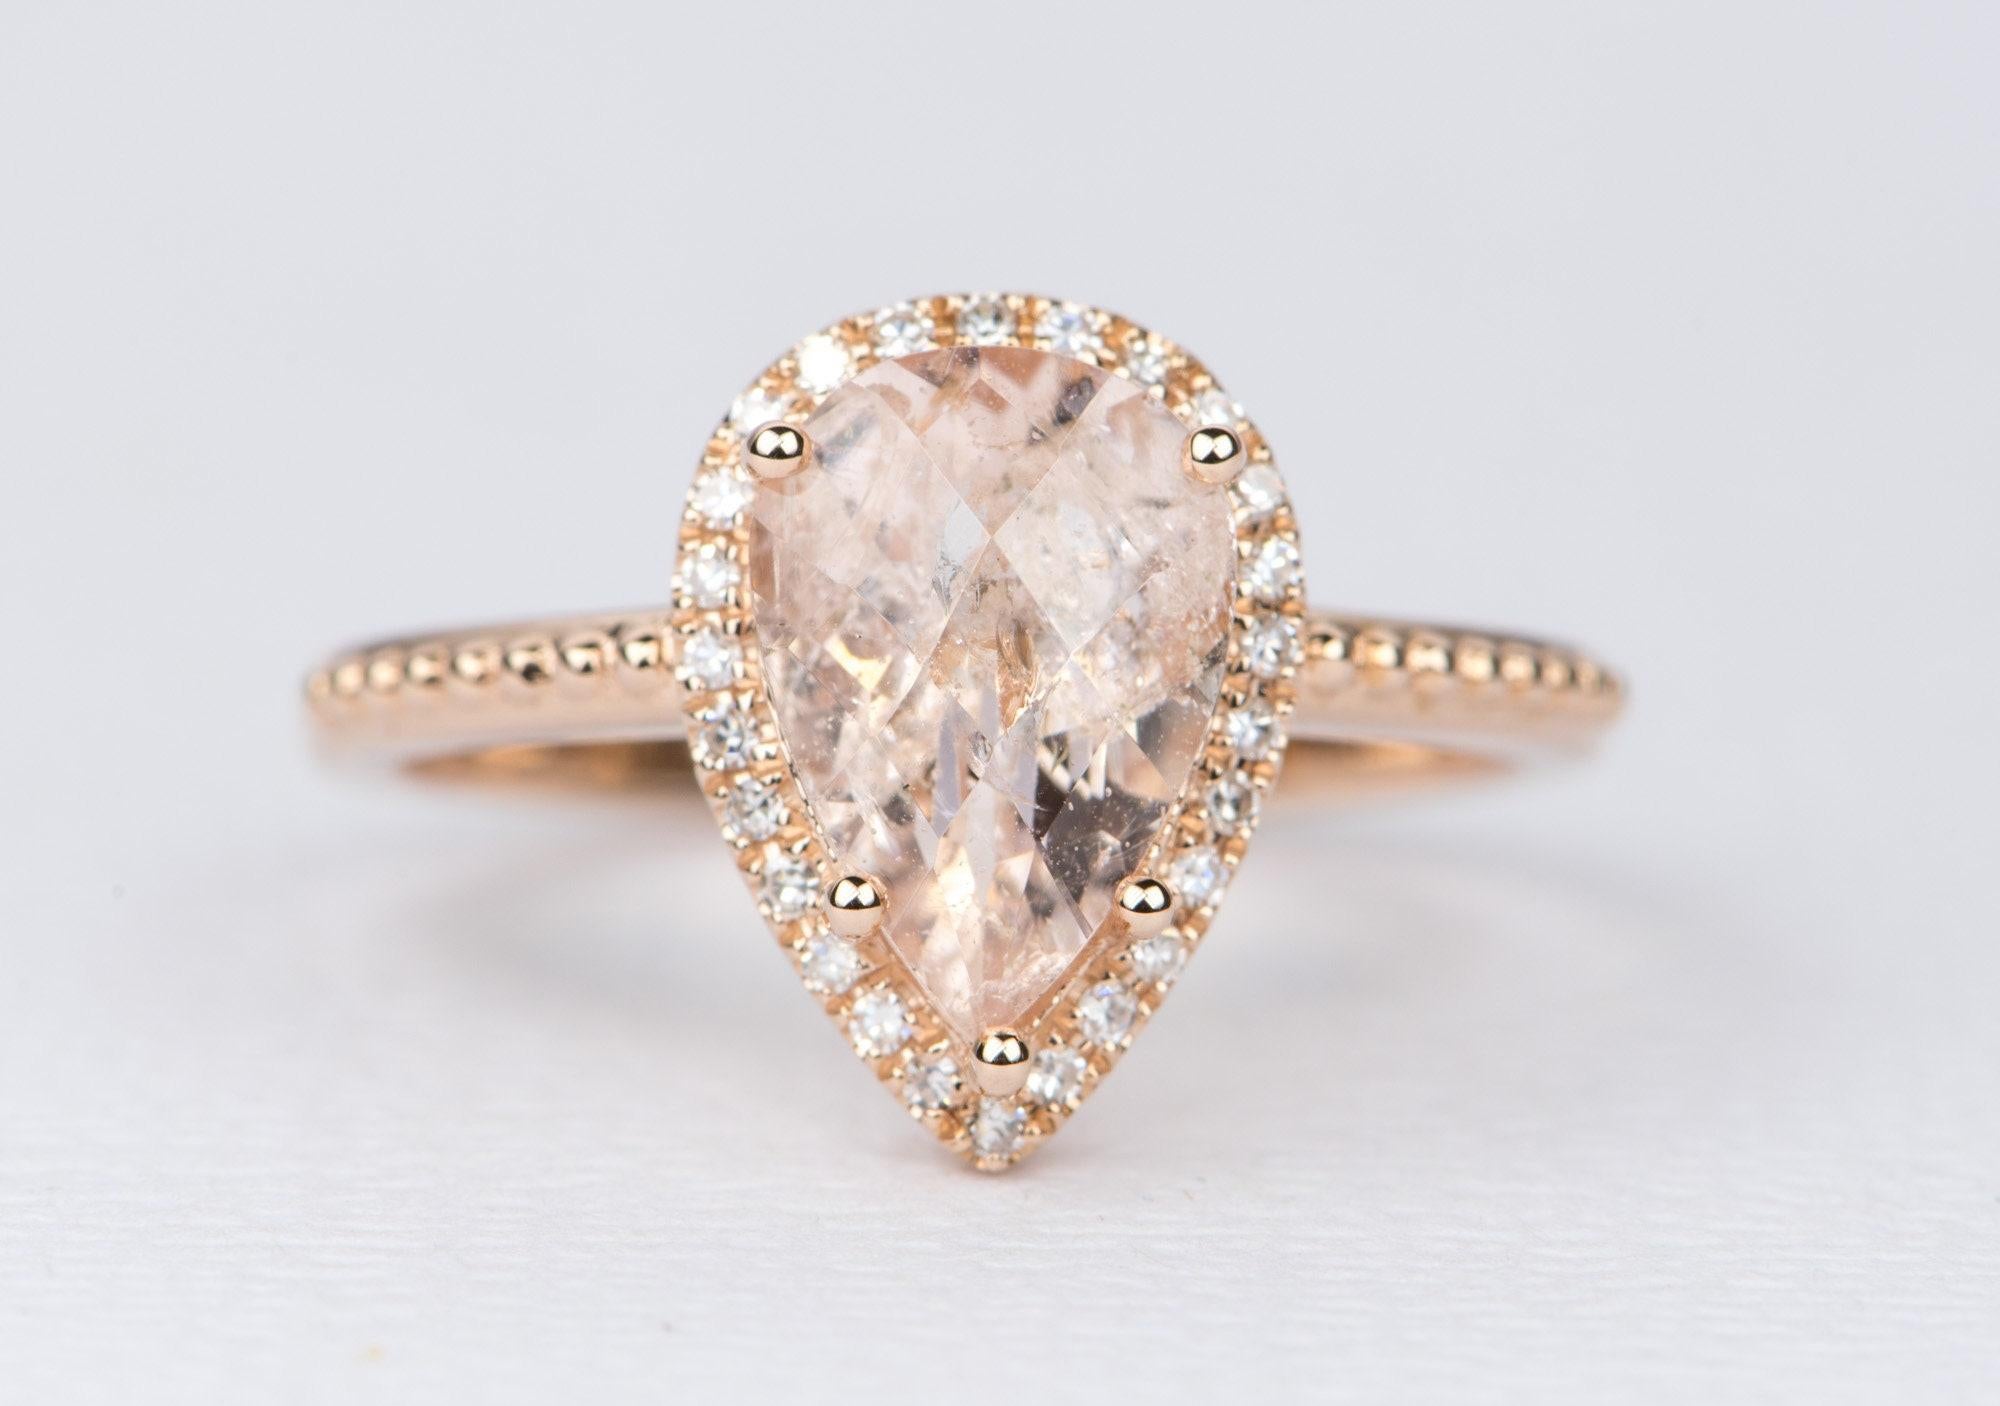 ♥  Solid 14K rose gold ring set with a pear shaped galaxy morganite in the center
♥  A diamond halo and beaded shank compliment the center stone
♥  The overall setting measures 9.43mm in width, 13.02mm in length, and sits 6.62mm tall from the